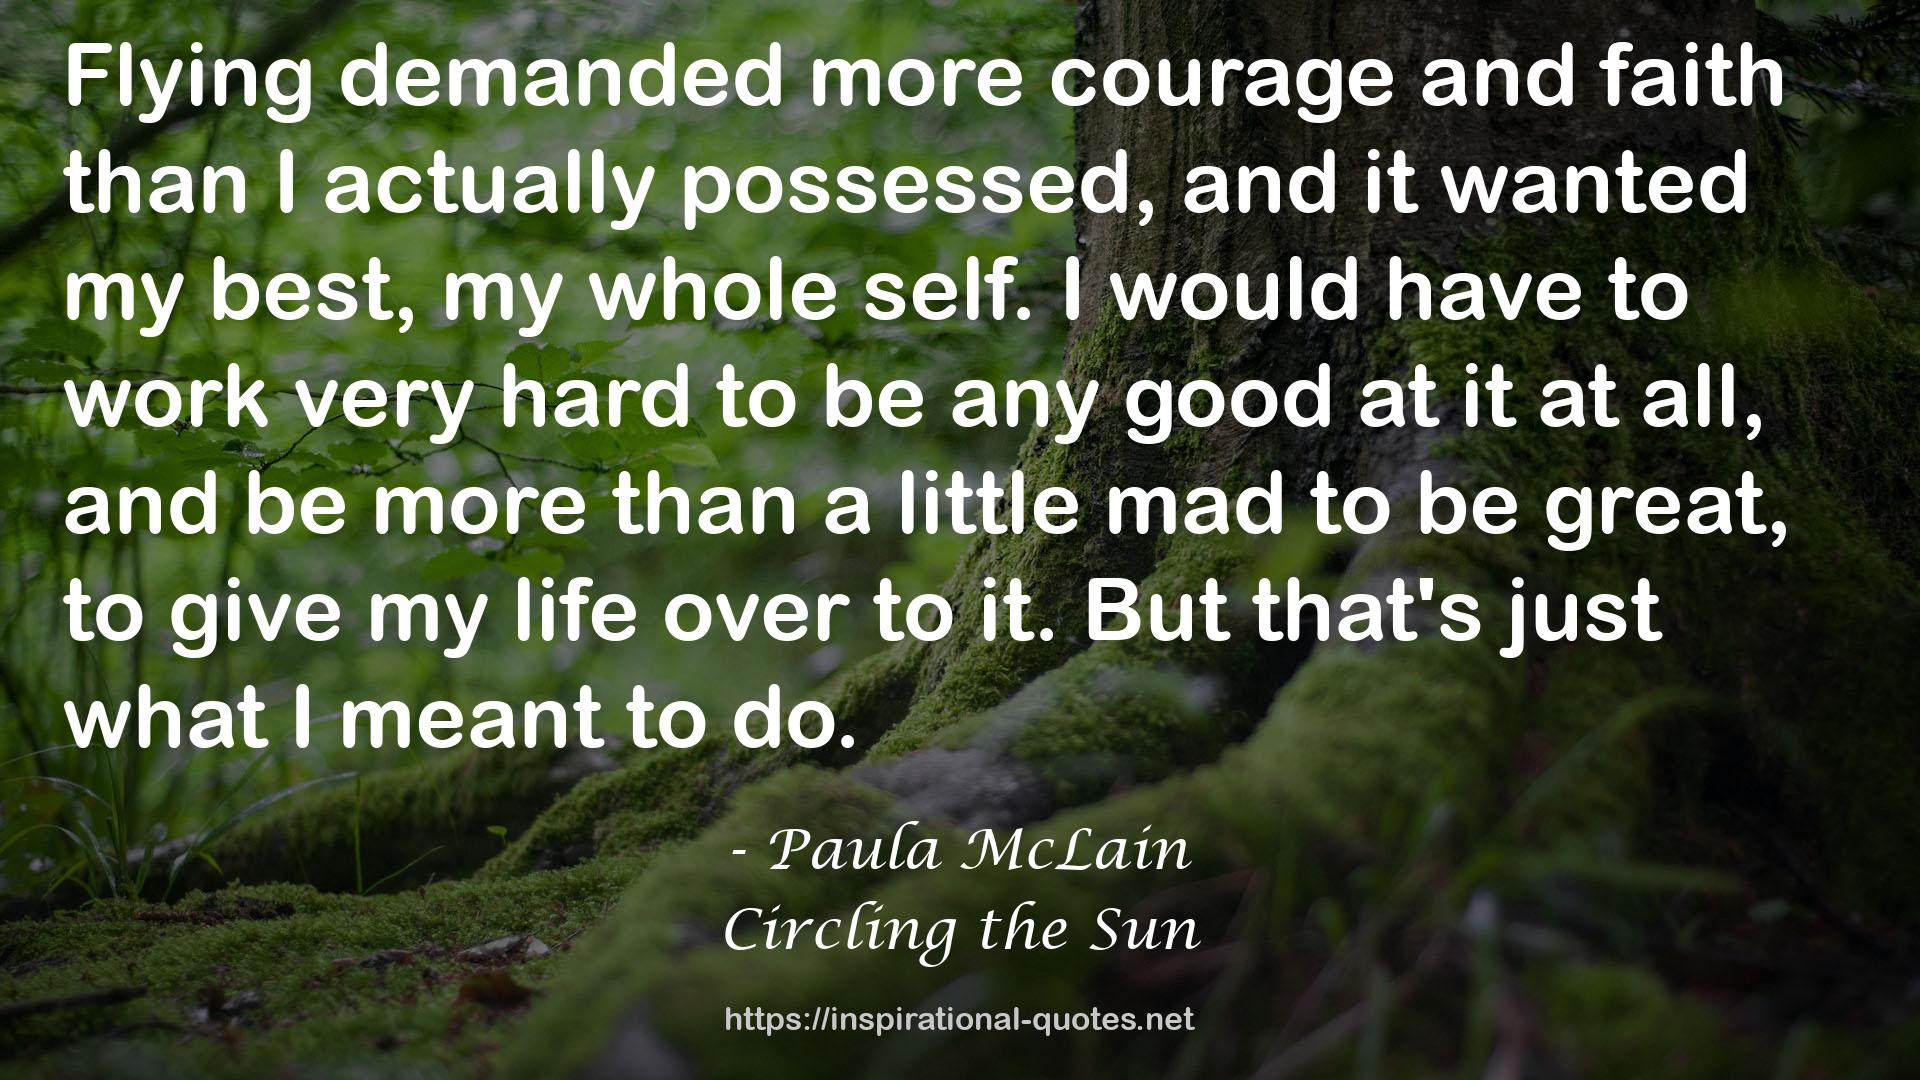 Circling the Sun QUOTES